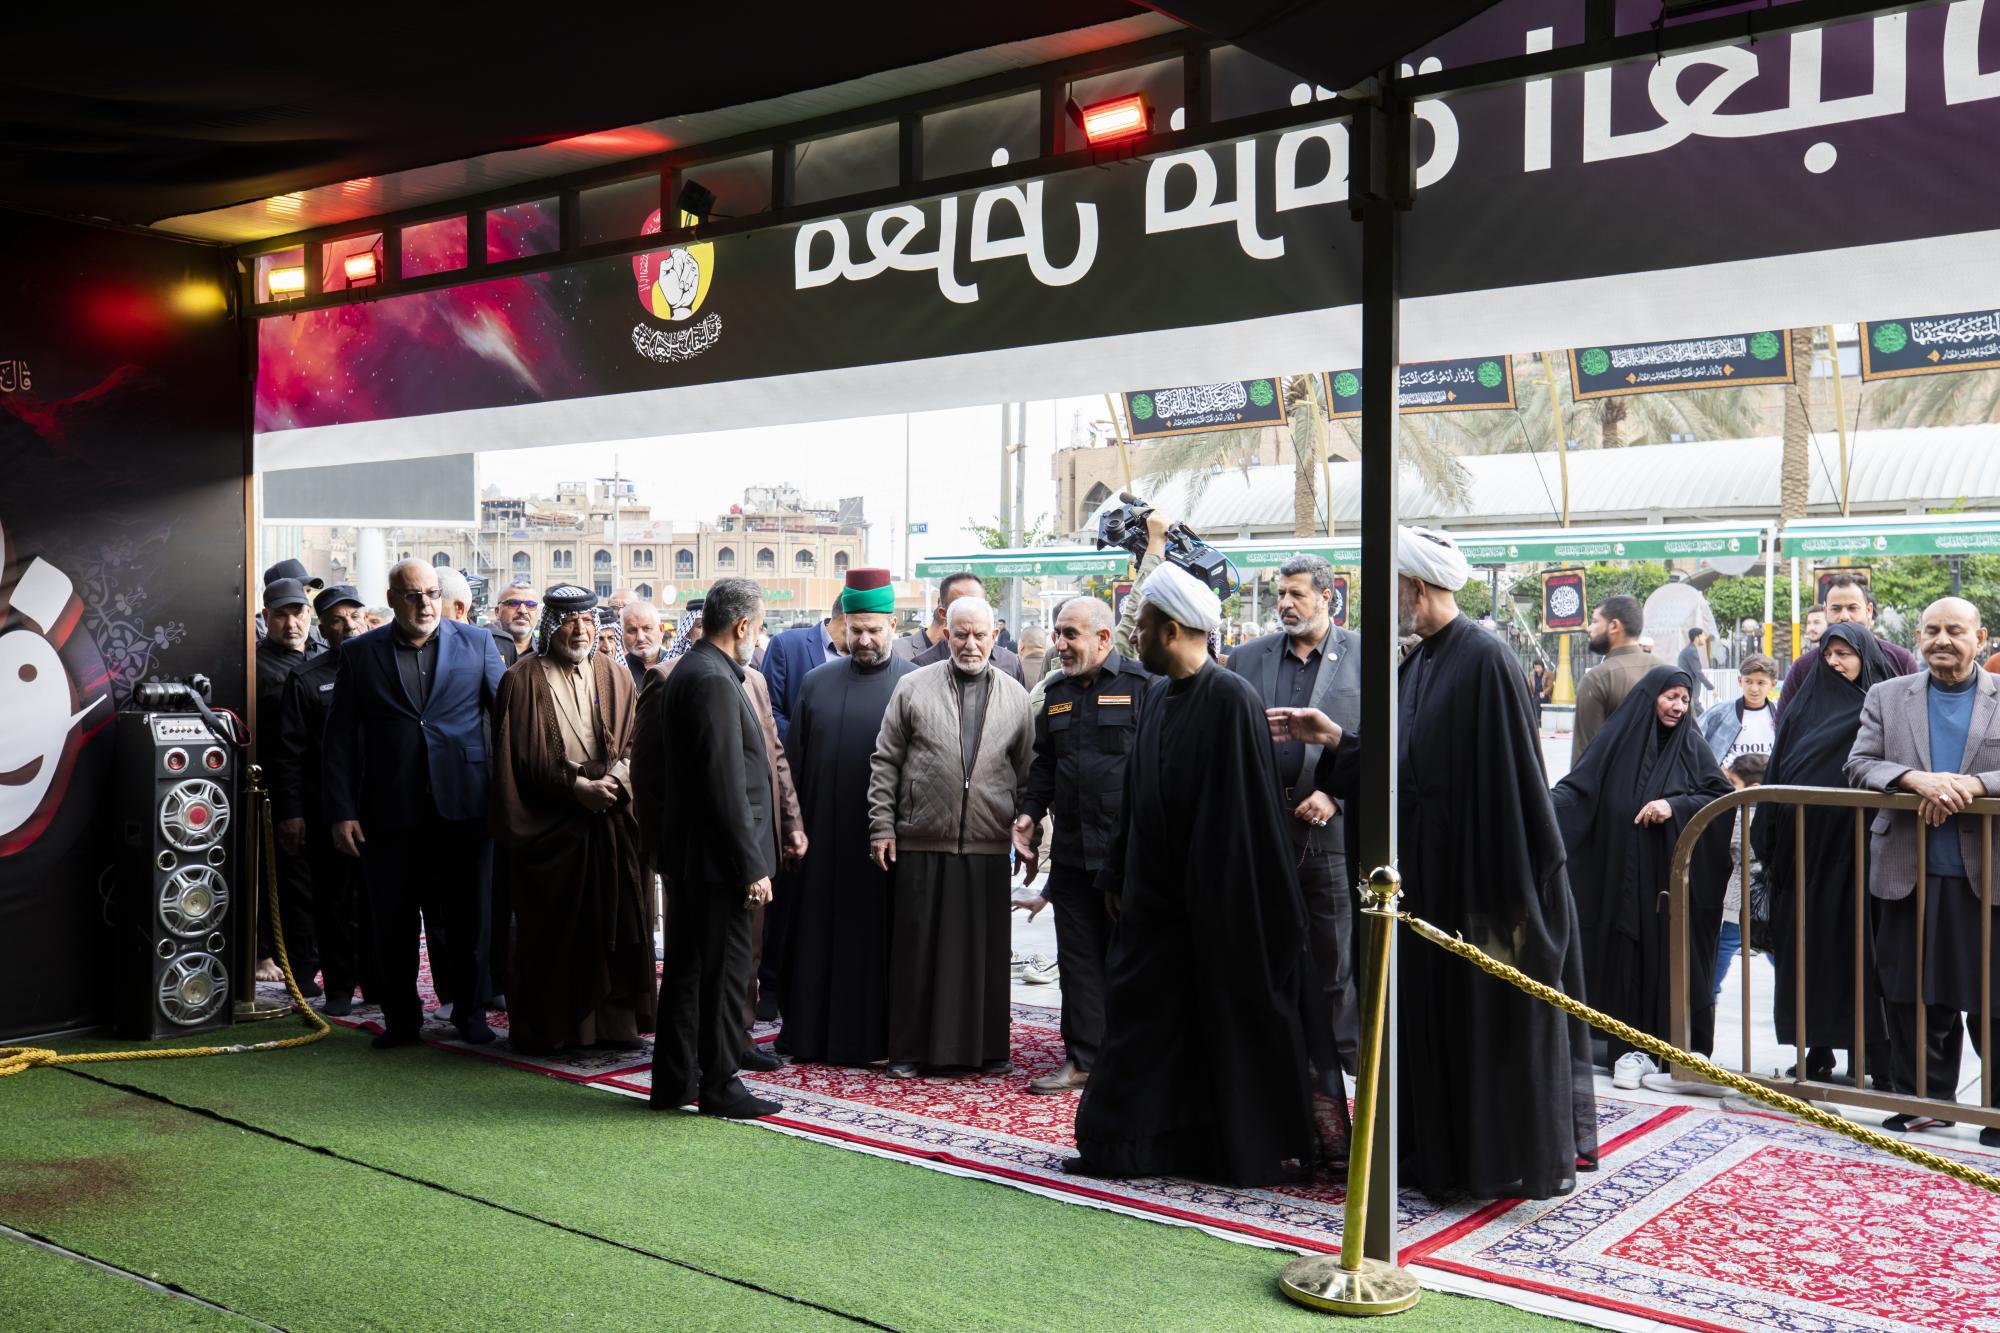 Opening of exhibition of Fatimi season of sorrows in area between Two Holy Shrines (+Photos)